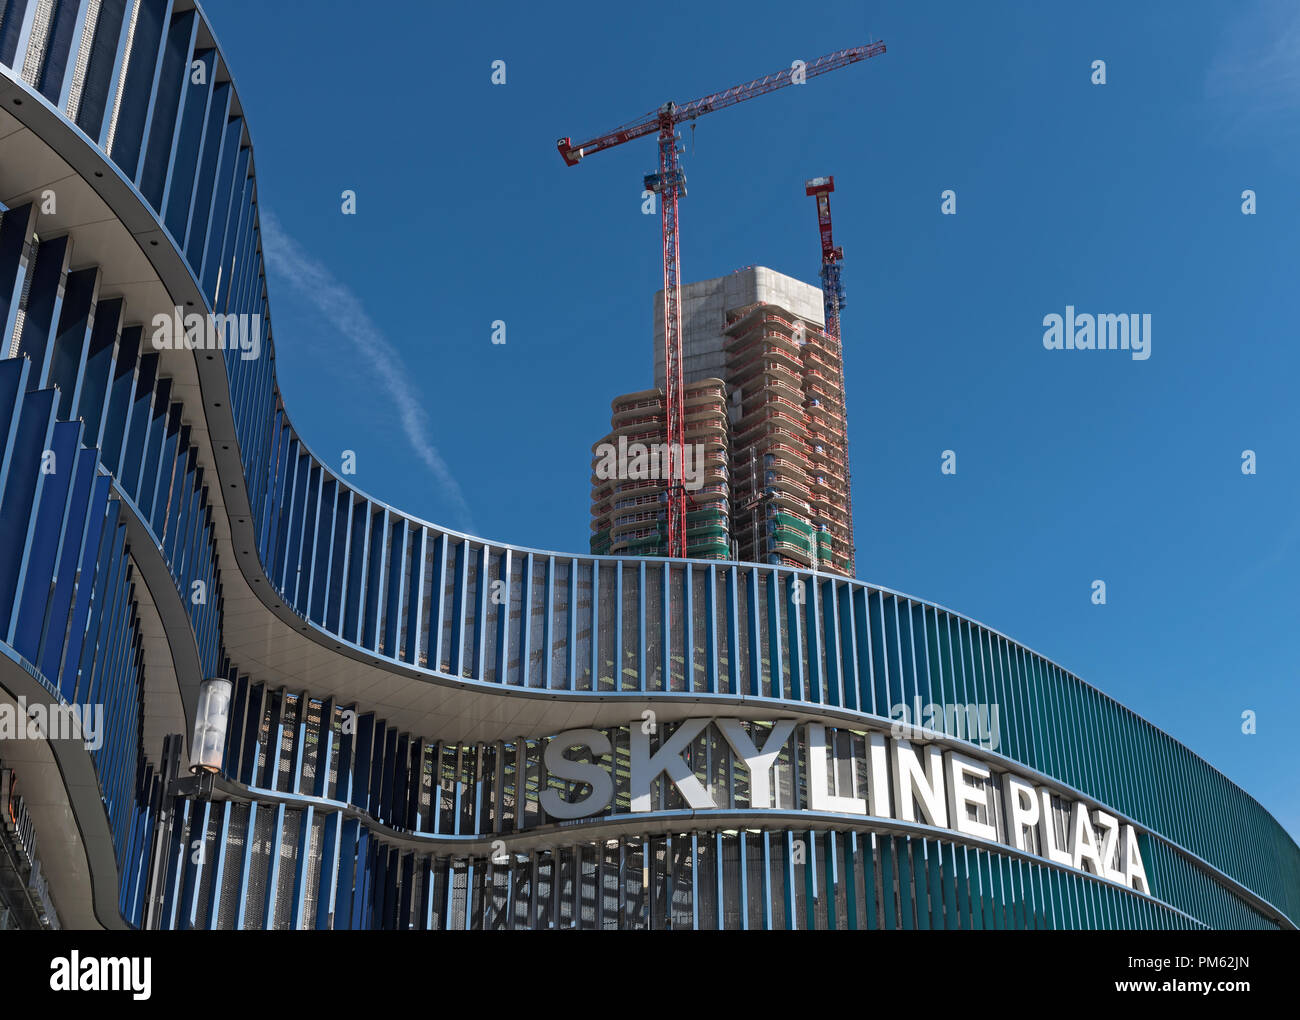 skyline plaza with grand tower, a skyscraper building under construction in frankfurt am main, germany. Stock Photo